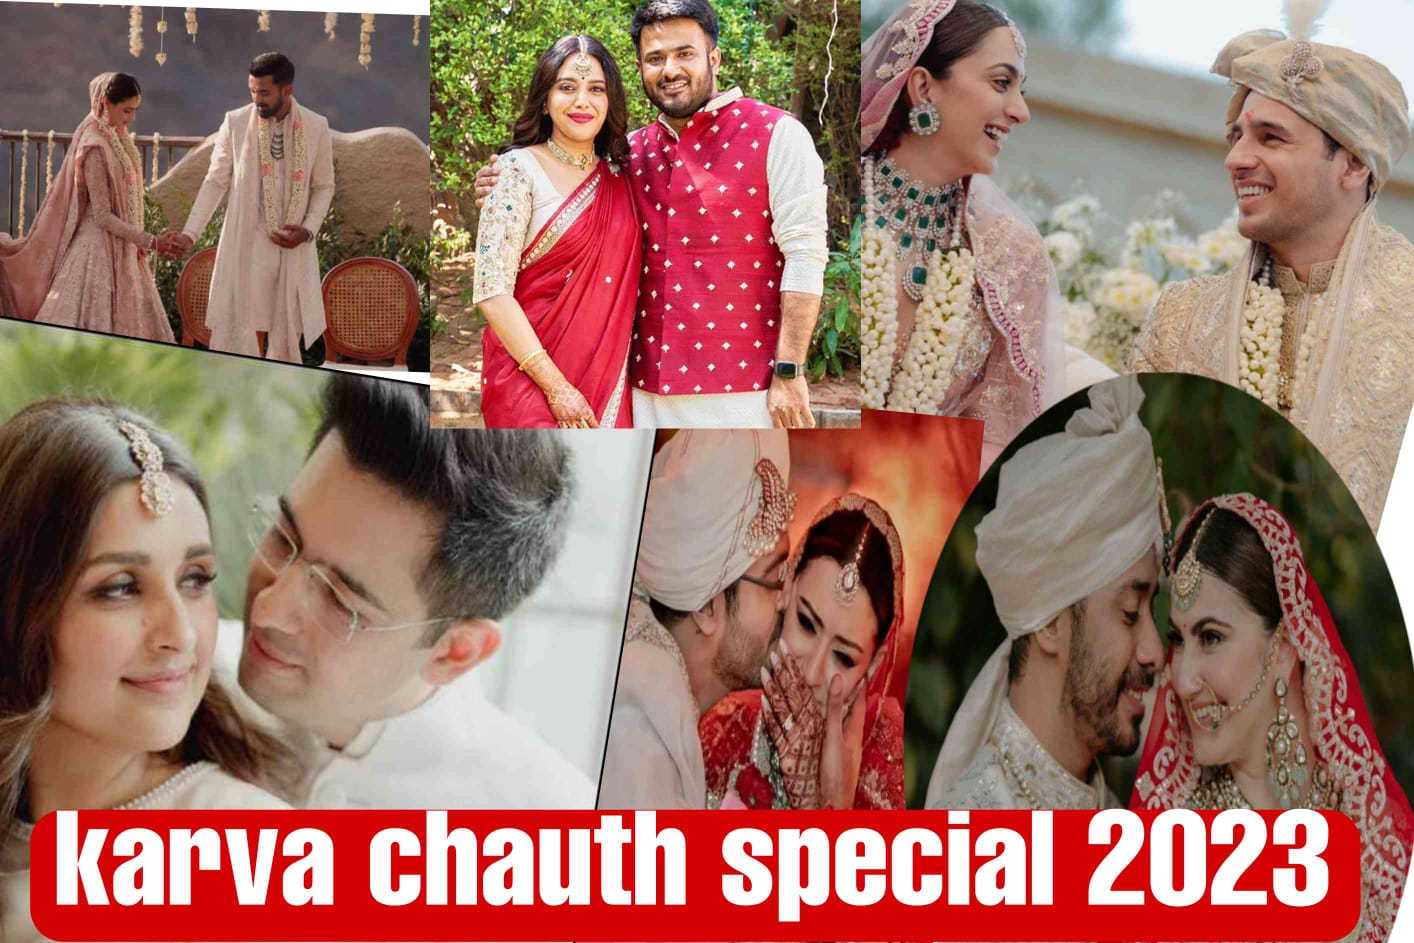 Karva Chauth special 2023: Bollywood actors making Karva Chauth for the first time this year